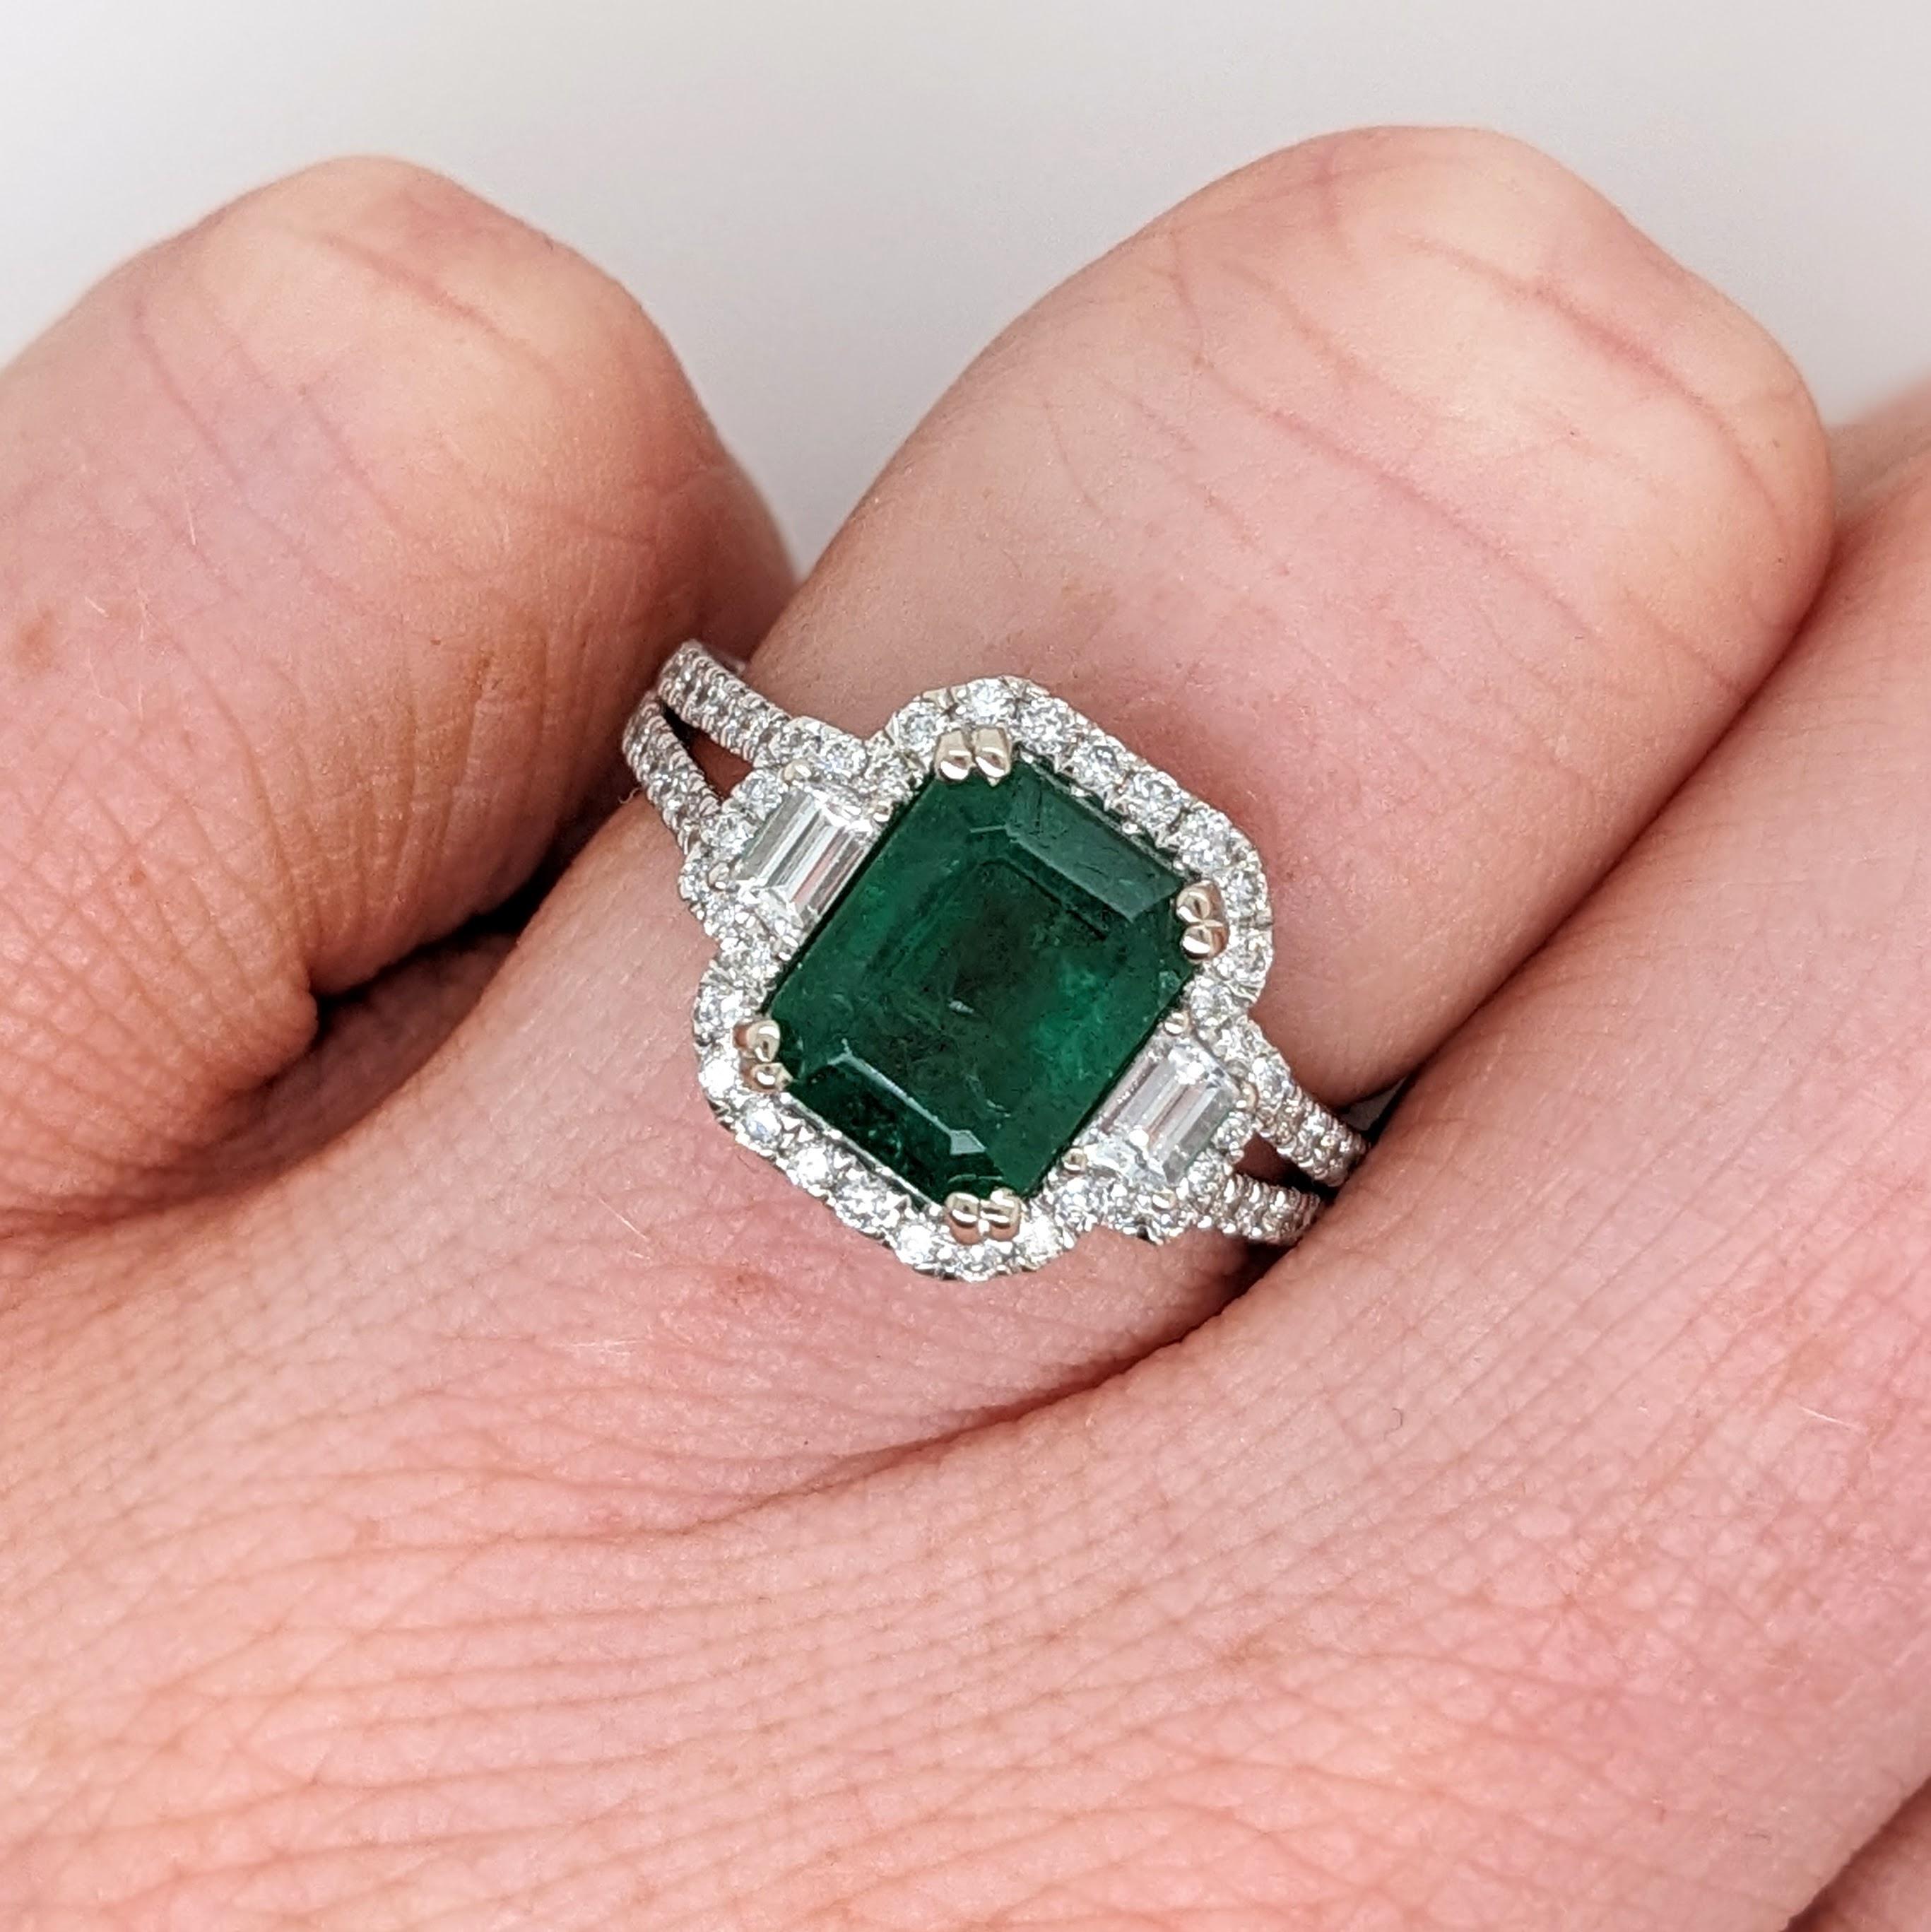 This statement ring has a vintage style emerald surrounded by a natural halo of diamonds and baguette diamond accents. This ring is made with solid 14k gold and can be customized to fit your needs! This ring also makes a beautiful May birthstone